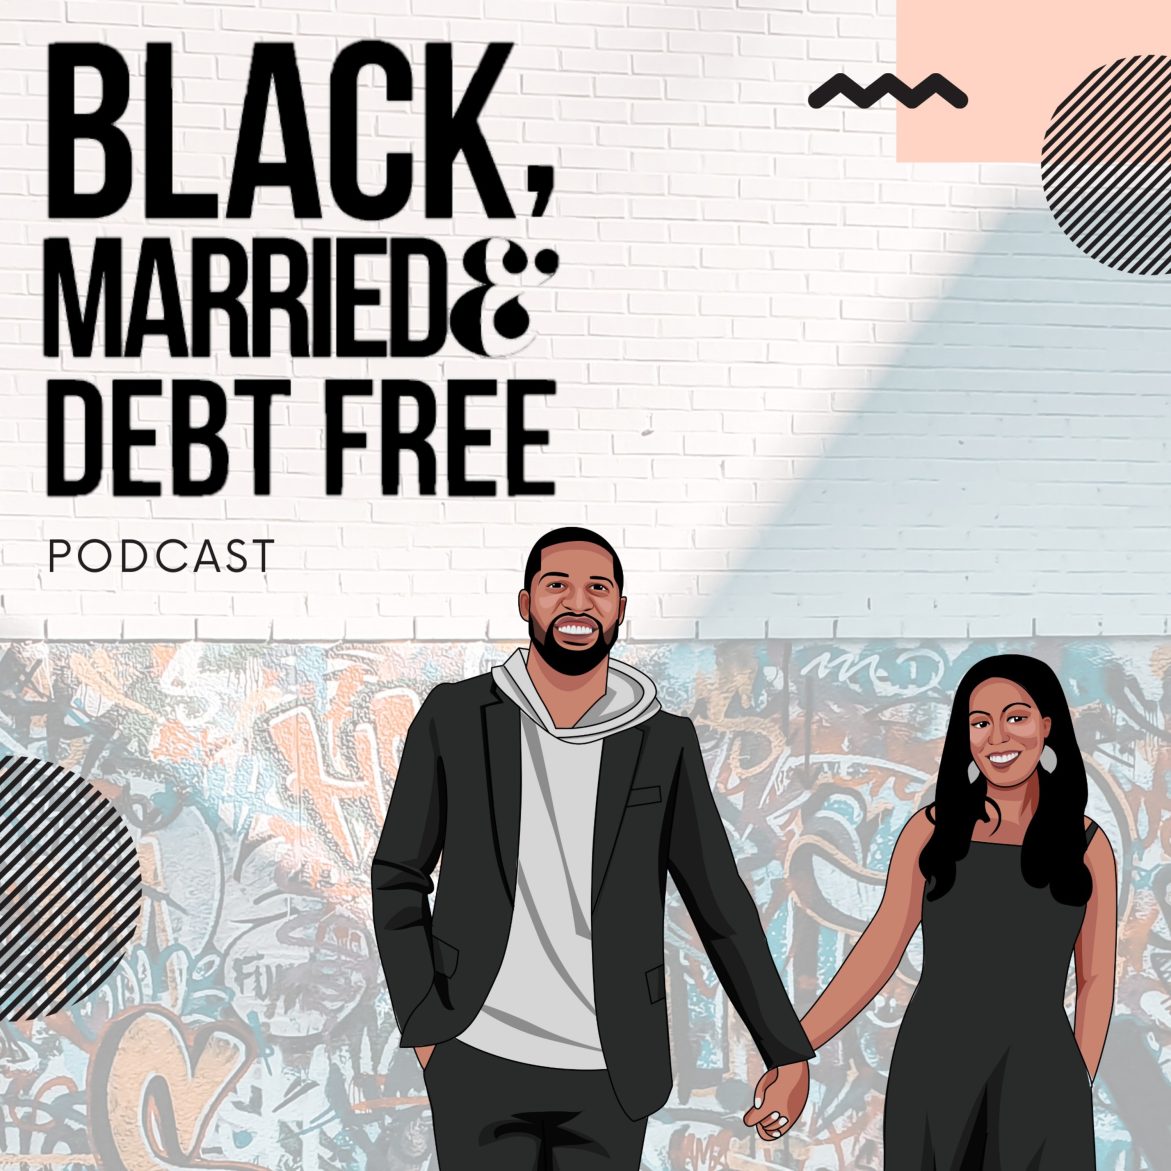 Black Podcasting - (EP -278 NO MUSIC) MARRIAGE & FAMILY MAKE A THRIVING COMMUNITY, SO WHY ARE BLACK MEN & WOMEN MARRYING LESS THAN ANY OTHER GROUP?